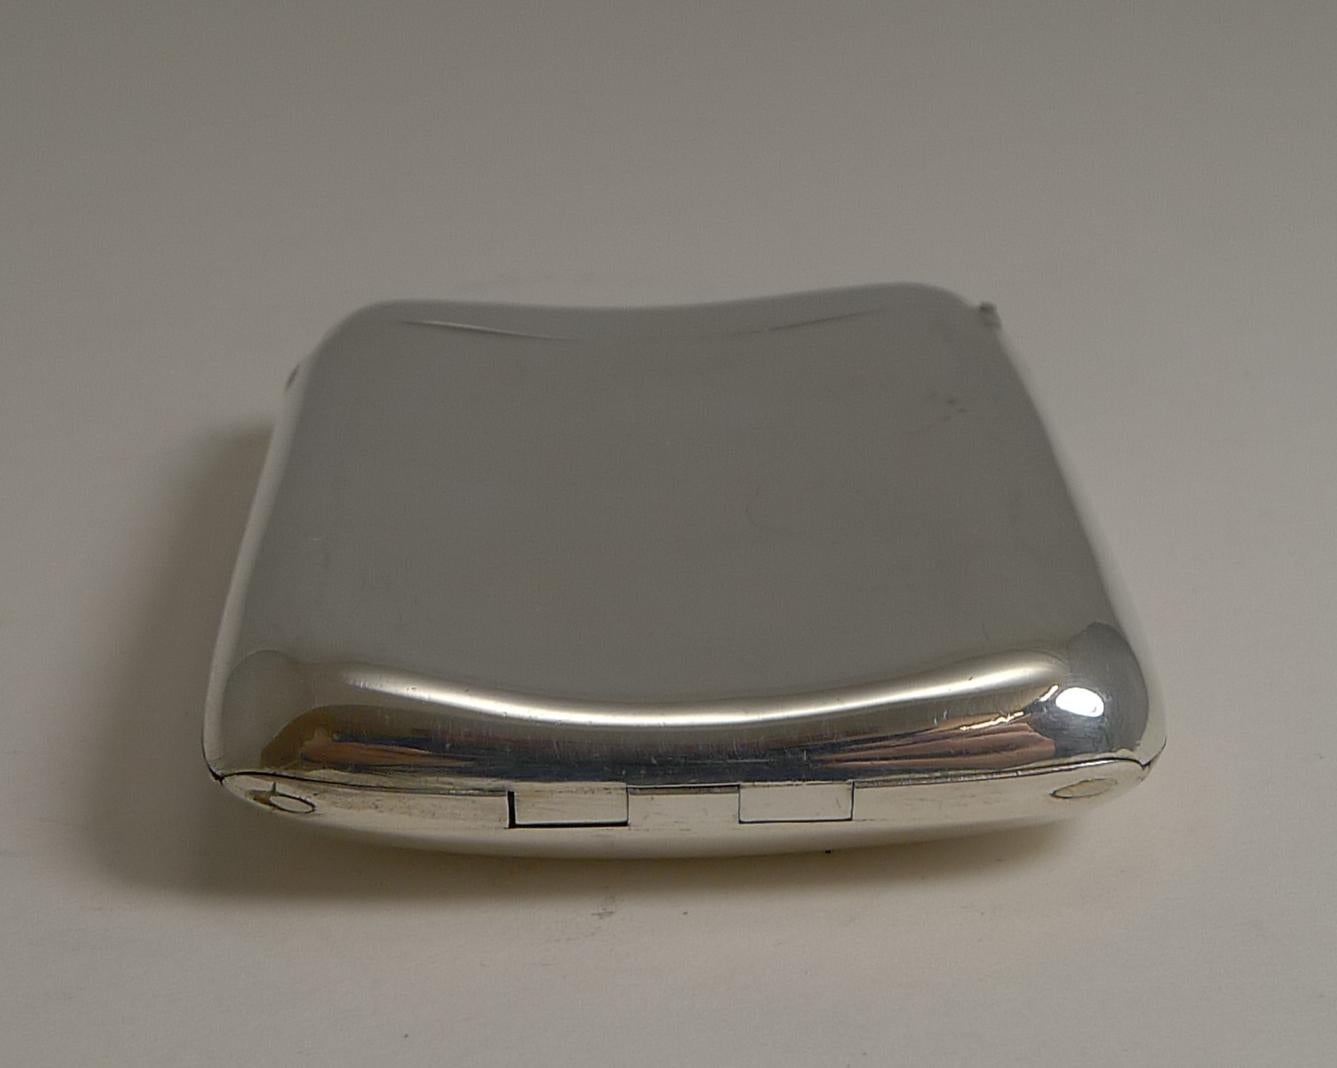 A most unusual small visiting card case featuring a concealed integral photograph / Picture frame.

The solid sterling silver case is shaped to fit more comfortably in a pocket. Visiting cards in the Victorian era were smaller than modern business